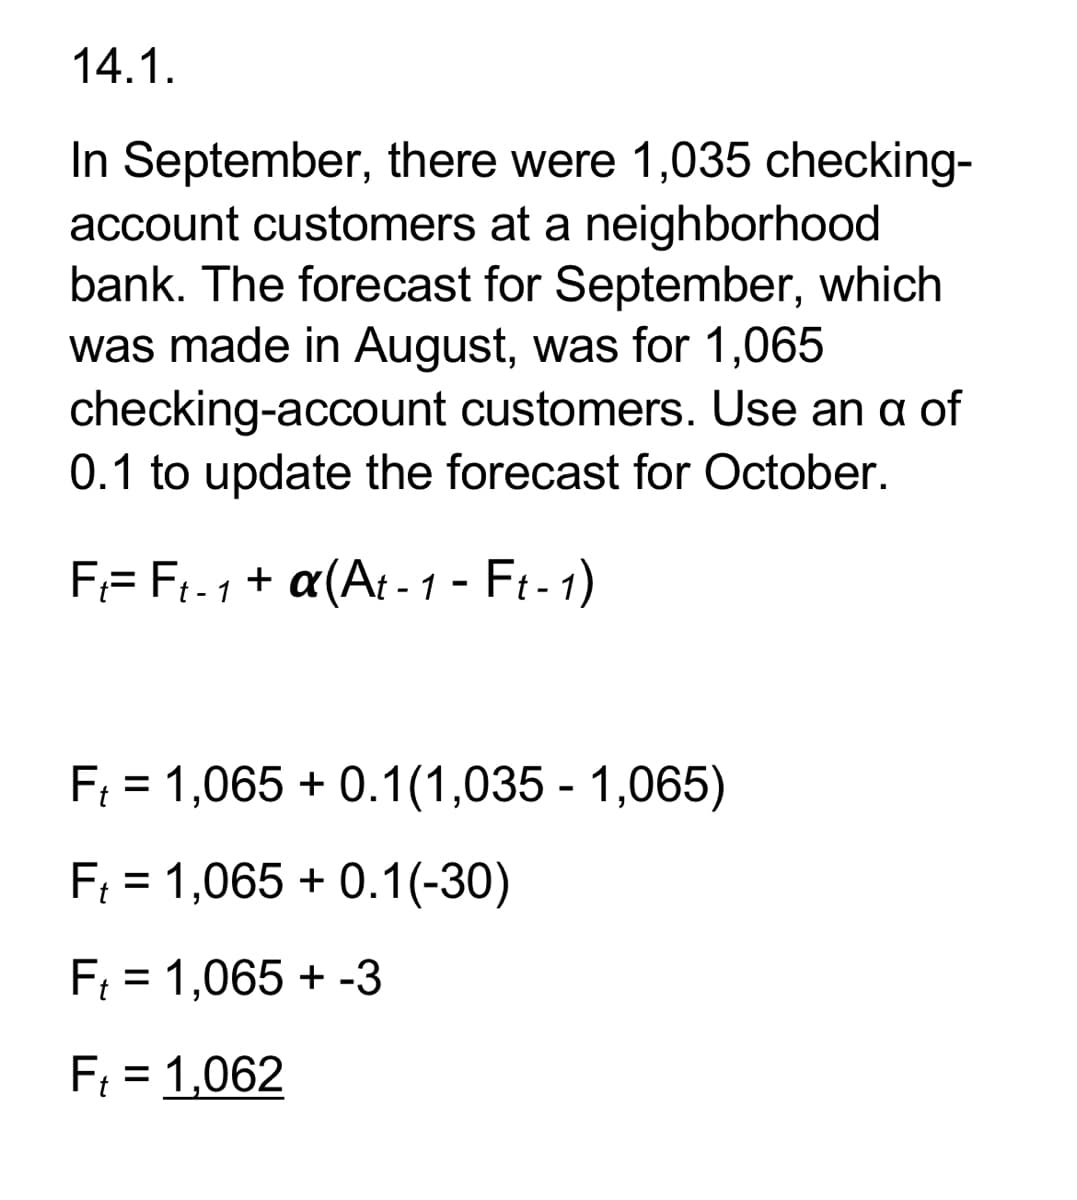 14.1.
In September, there were 1,035 checking-
account customers at a neighborhood
bank. The forecast for September, which
was made in August, was for 1,065
checking-account customers. Use an a of
0.1 to update the forecast for October.
F= Ft-1 + a(At-1 - Ft-1)
F₁ = 1,065 +0.1(1,035 - 1,065)
F₁ = 1,065 +0.1(-30)
F₁ = 1,065 + -3
F₁ = 1,062